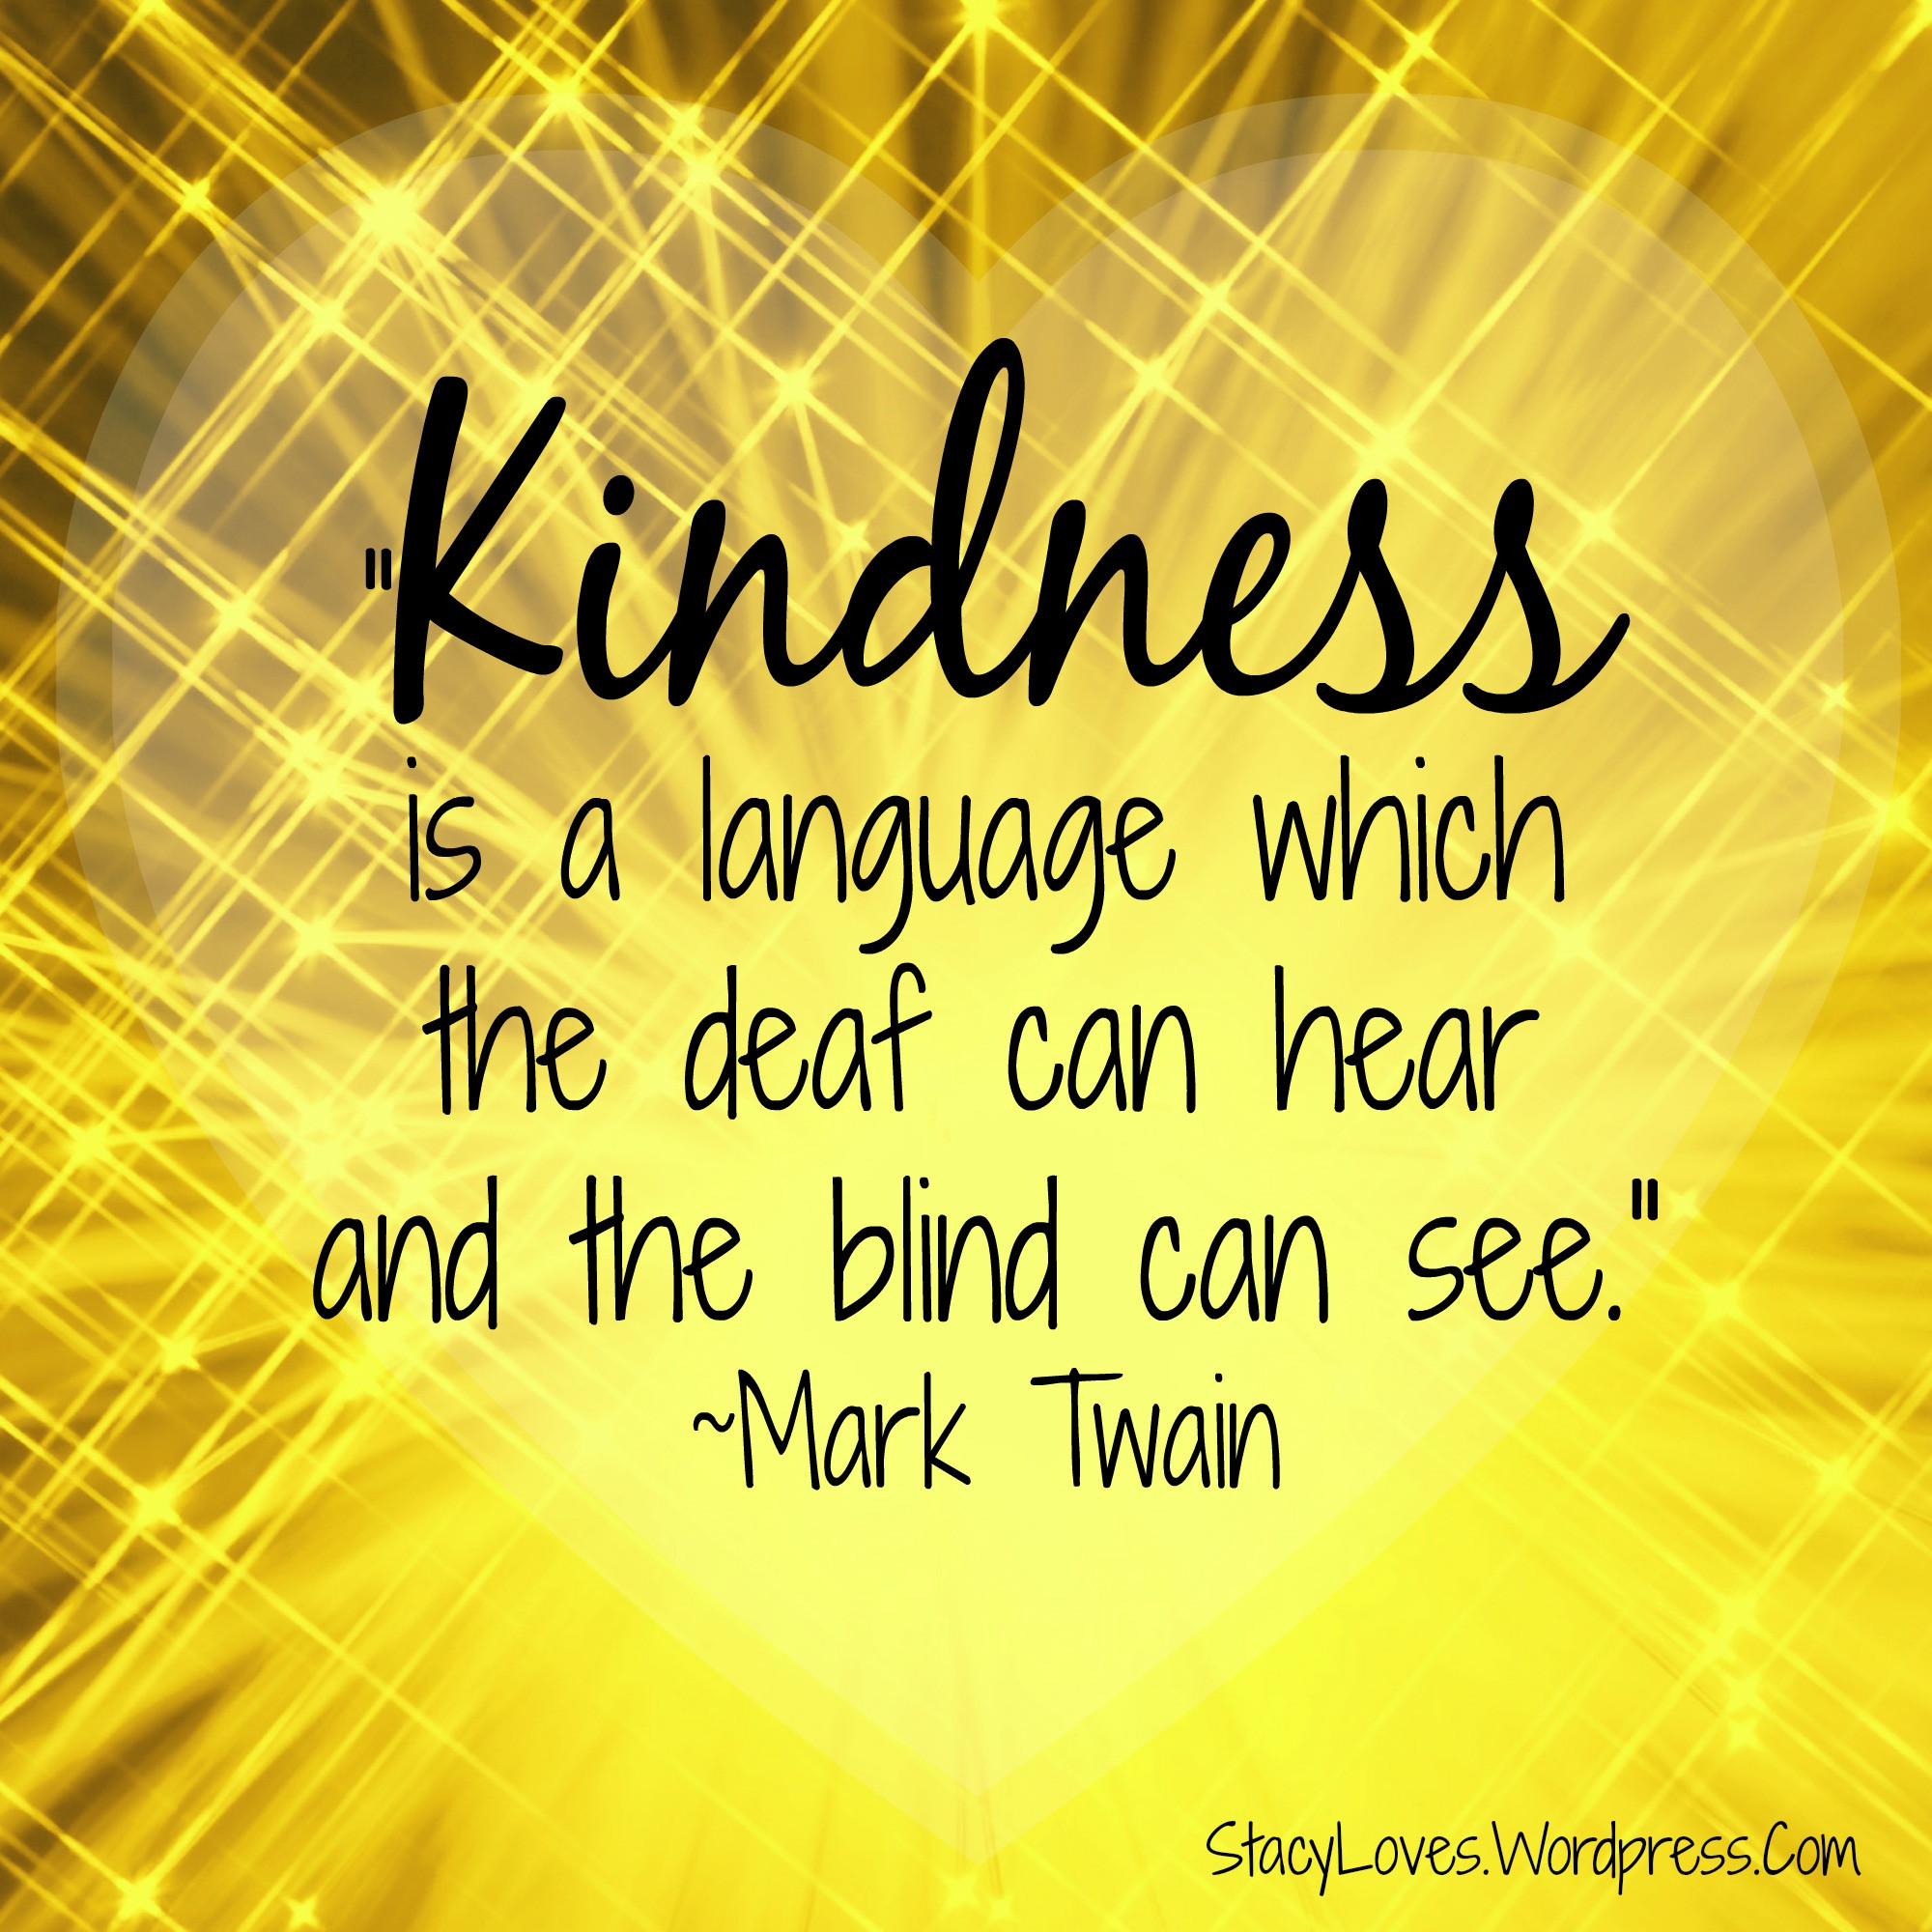 Quote About Random Acts Of Kindness
 Kindness Quotes